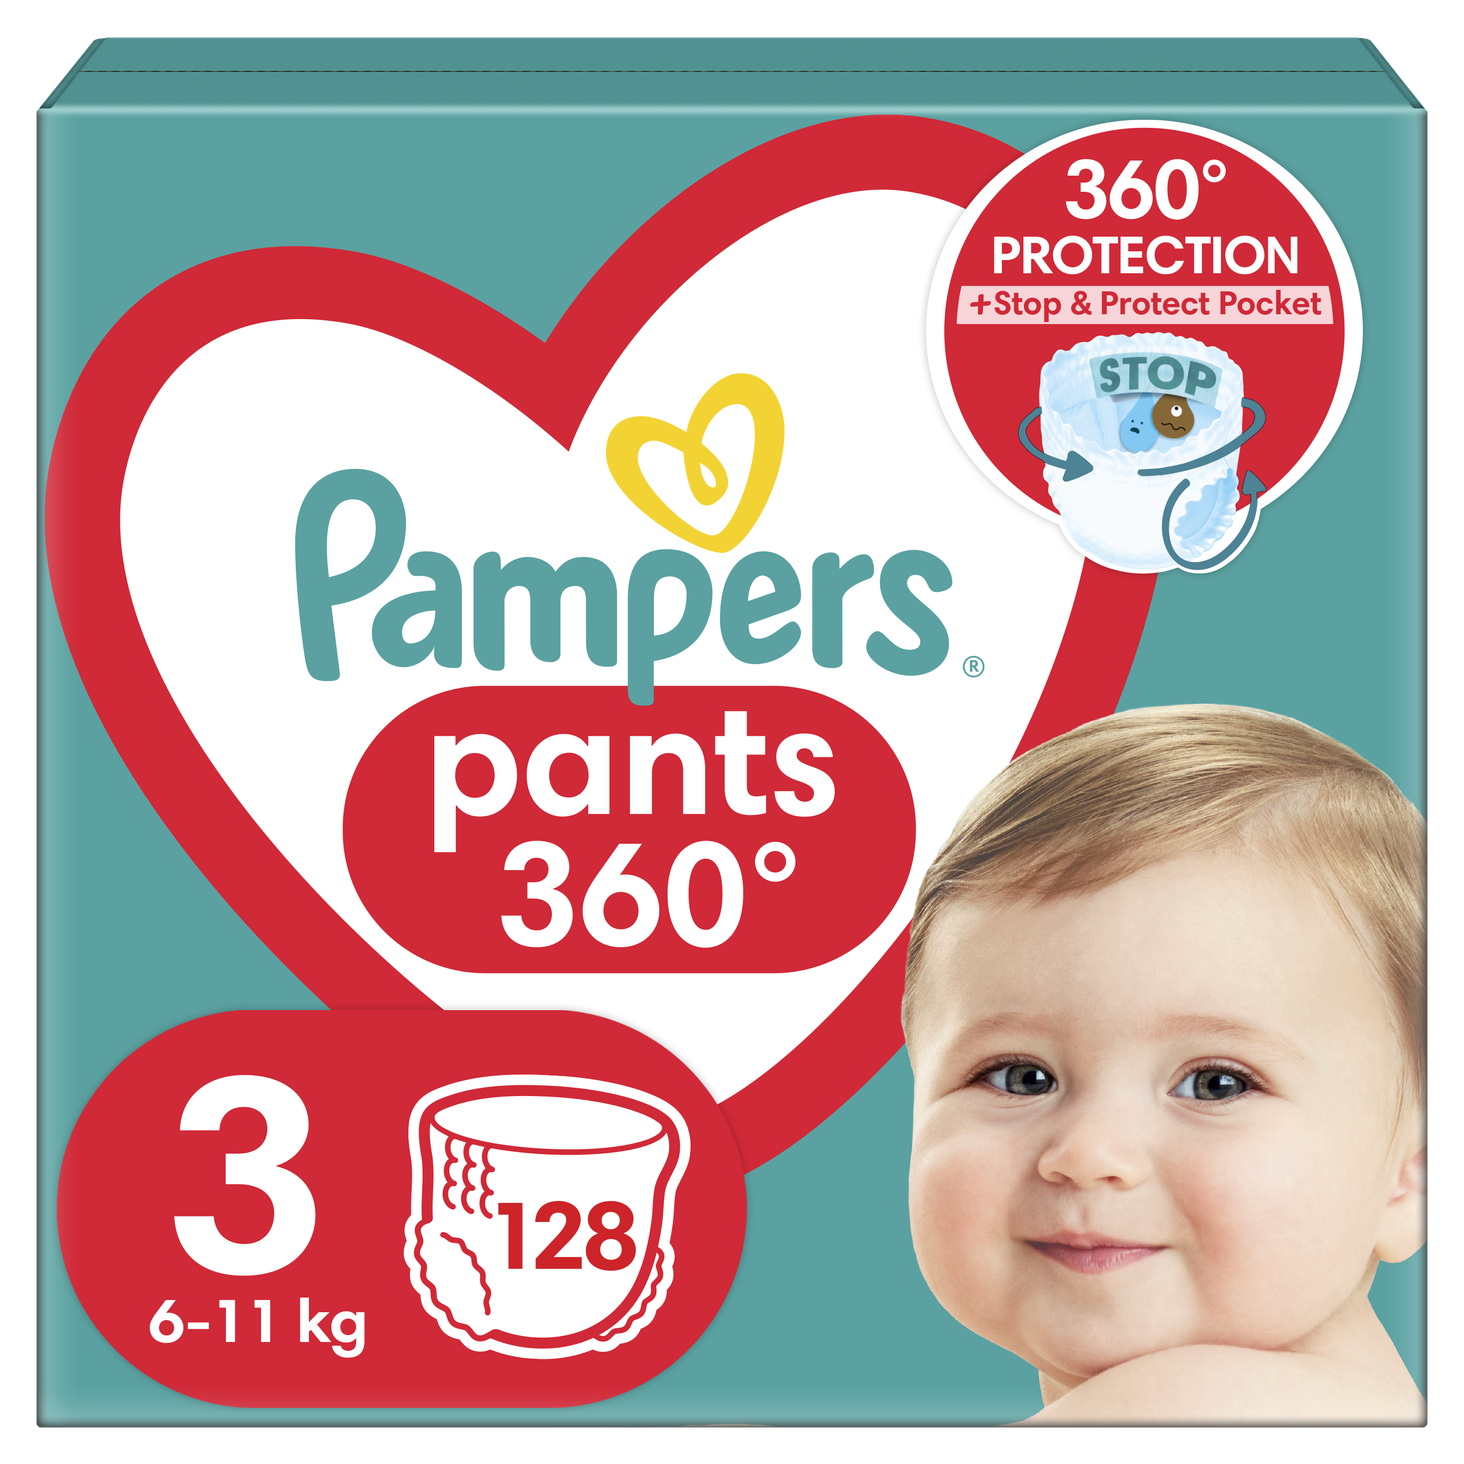 pampers pant 3 ceneo